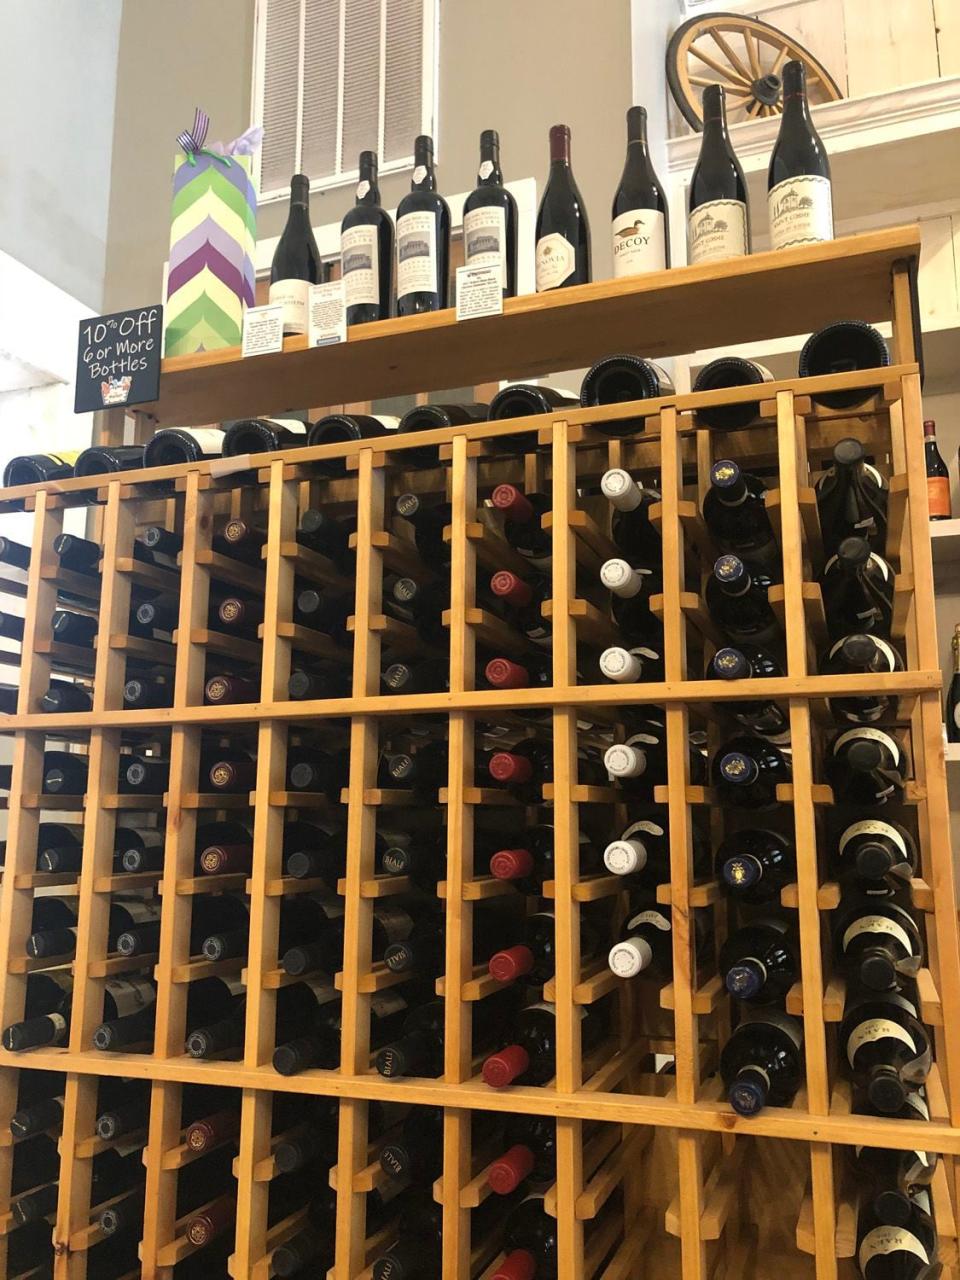 The area is home to a number of wineries and tasting rooms. Enjoy a glass while shopping in downtown Clayton at the Clayton Cafe and Market...